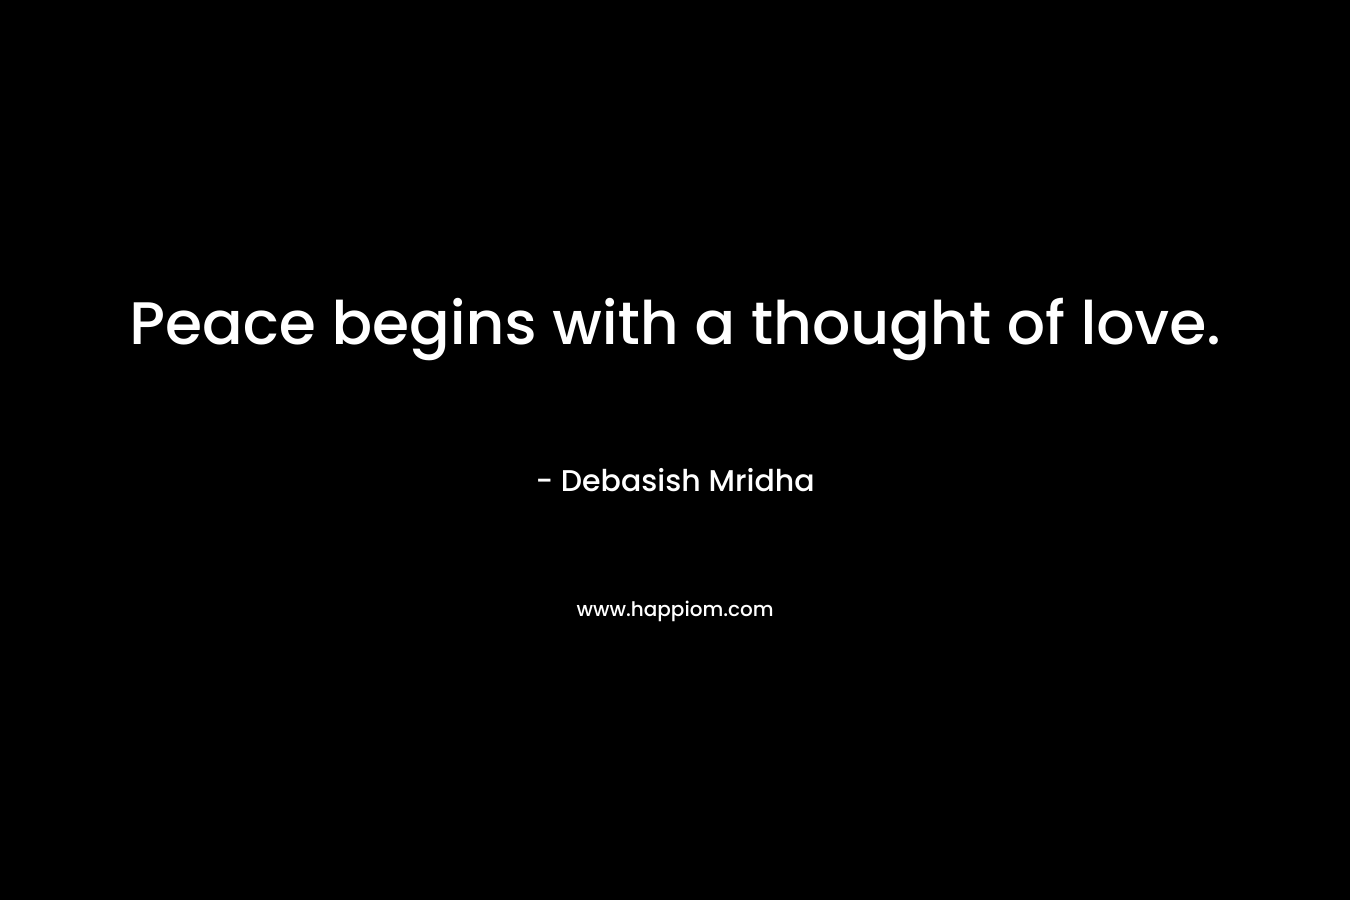 Peace begins with a thought of love.